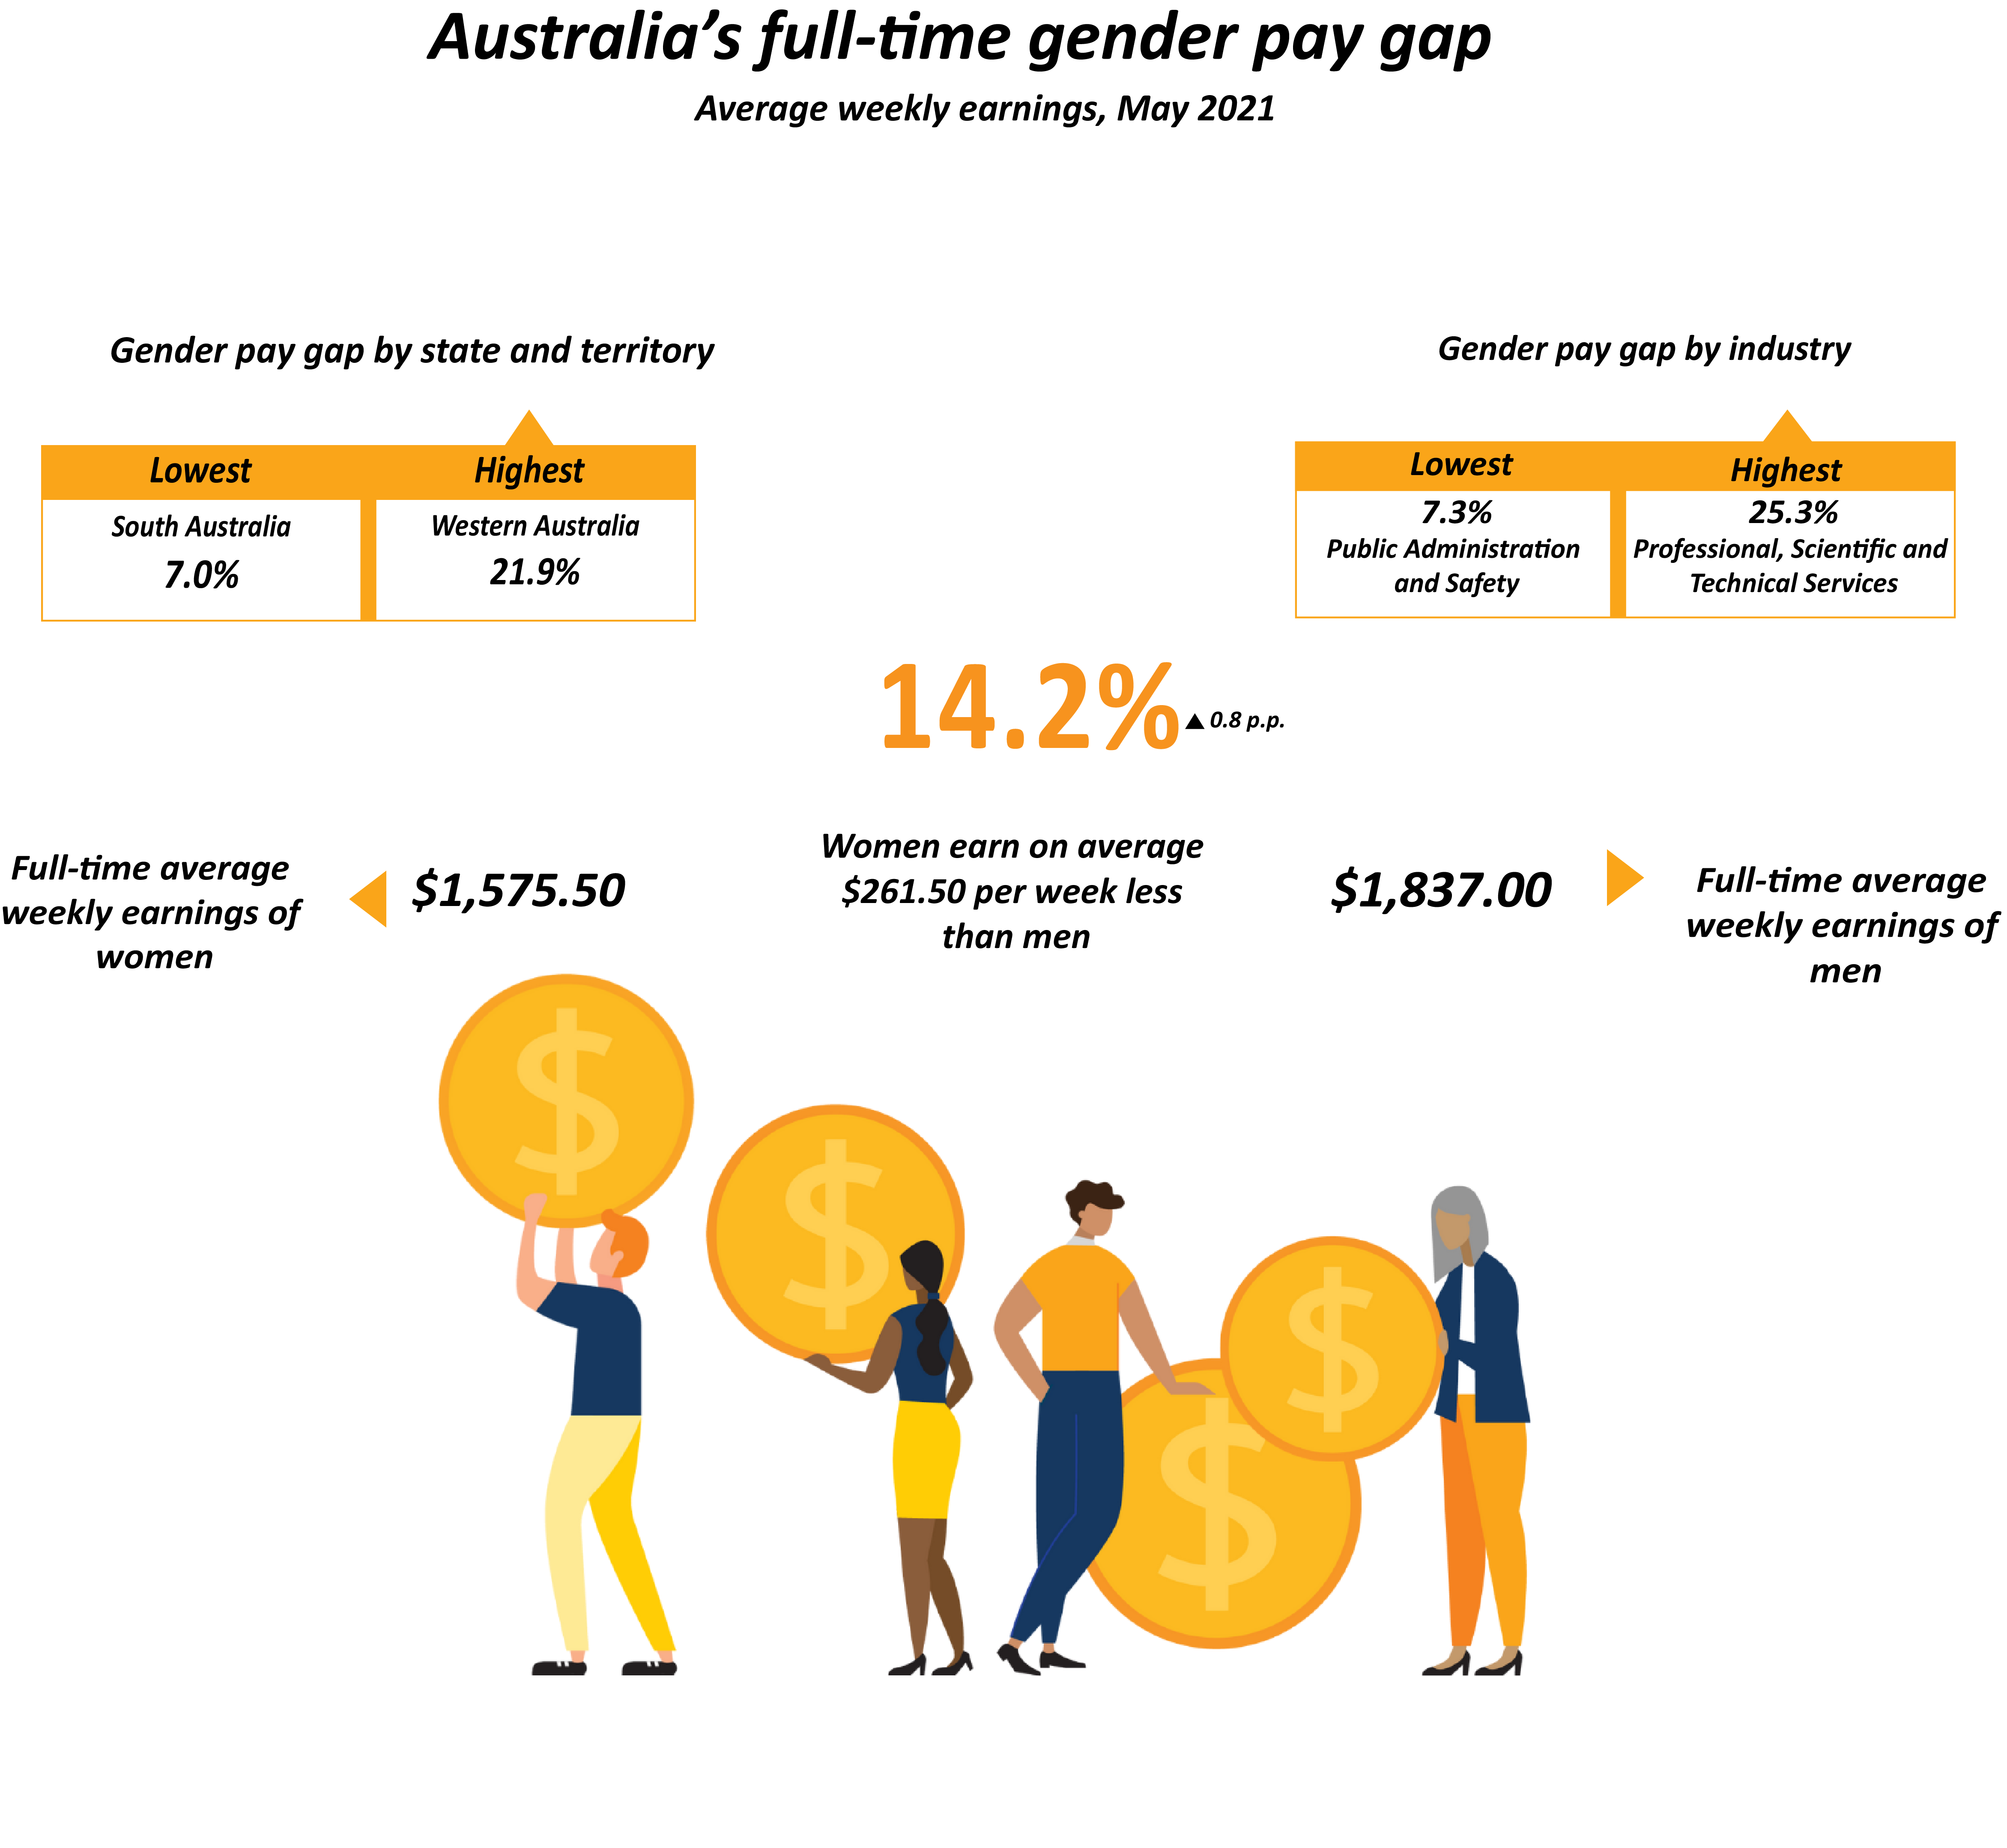 This image depicts the national gender pay gap which is 14.2%